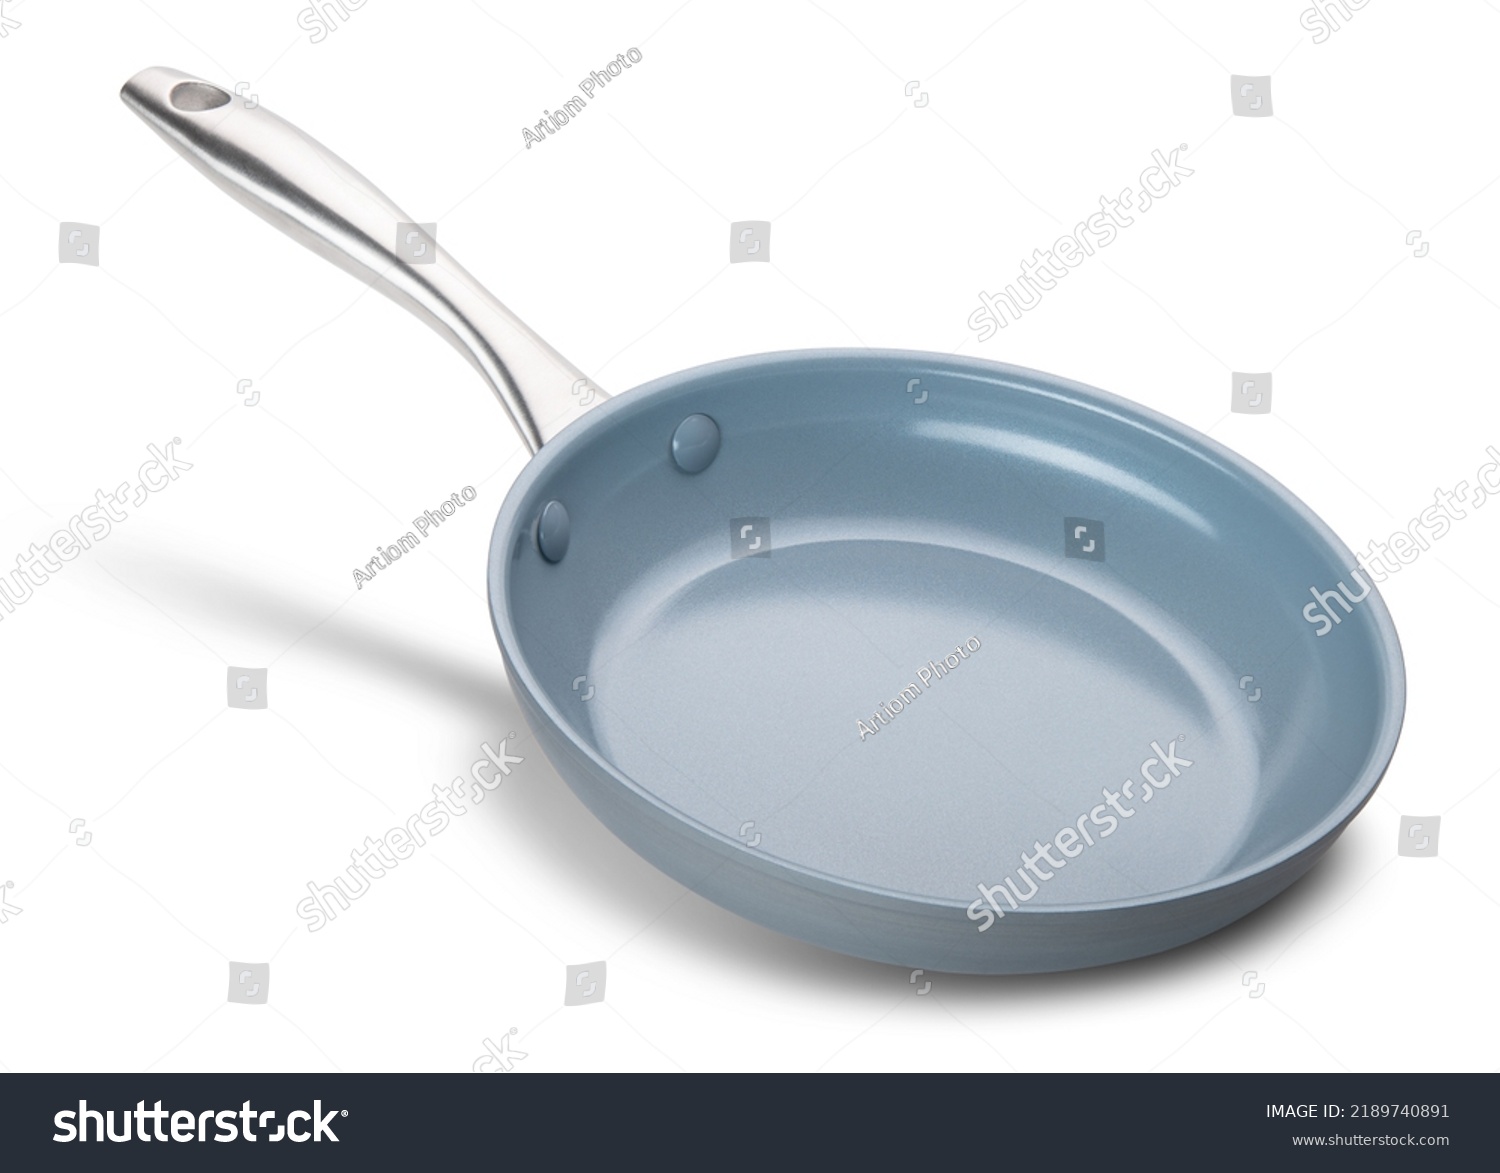 Frying pan. Ceramic Nonstick with stainless steel handle. Fry pan for cooking. Gray ceramic coating. Free of PFAS, PFOA, lead and cadmium. White  isolated background. High quality and resolution photo #2189740891